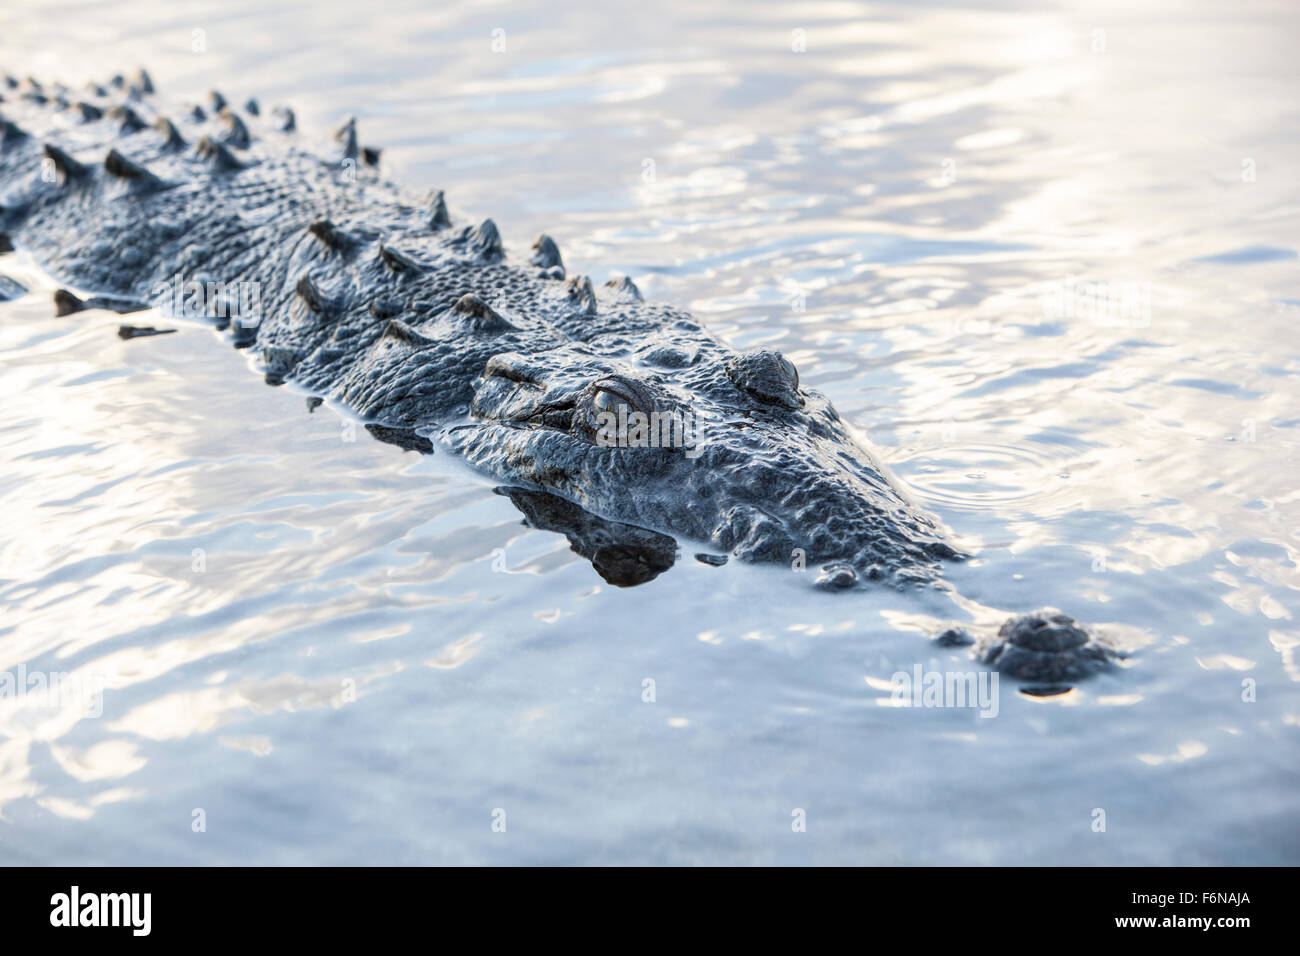 A large American crocodile (Crocodylus acutus) surfaces in a lagoon in Turneffe Atoll, Belize. This potentially dangerous reptil Stock Photo